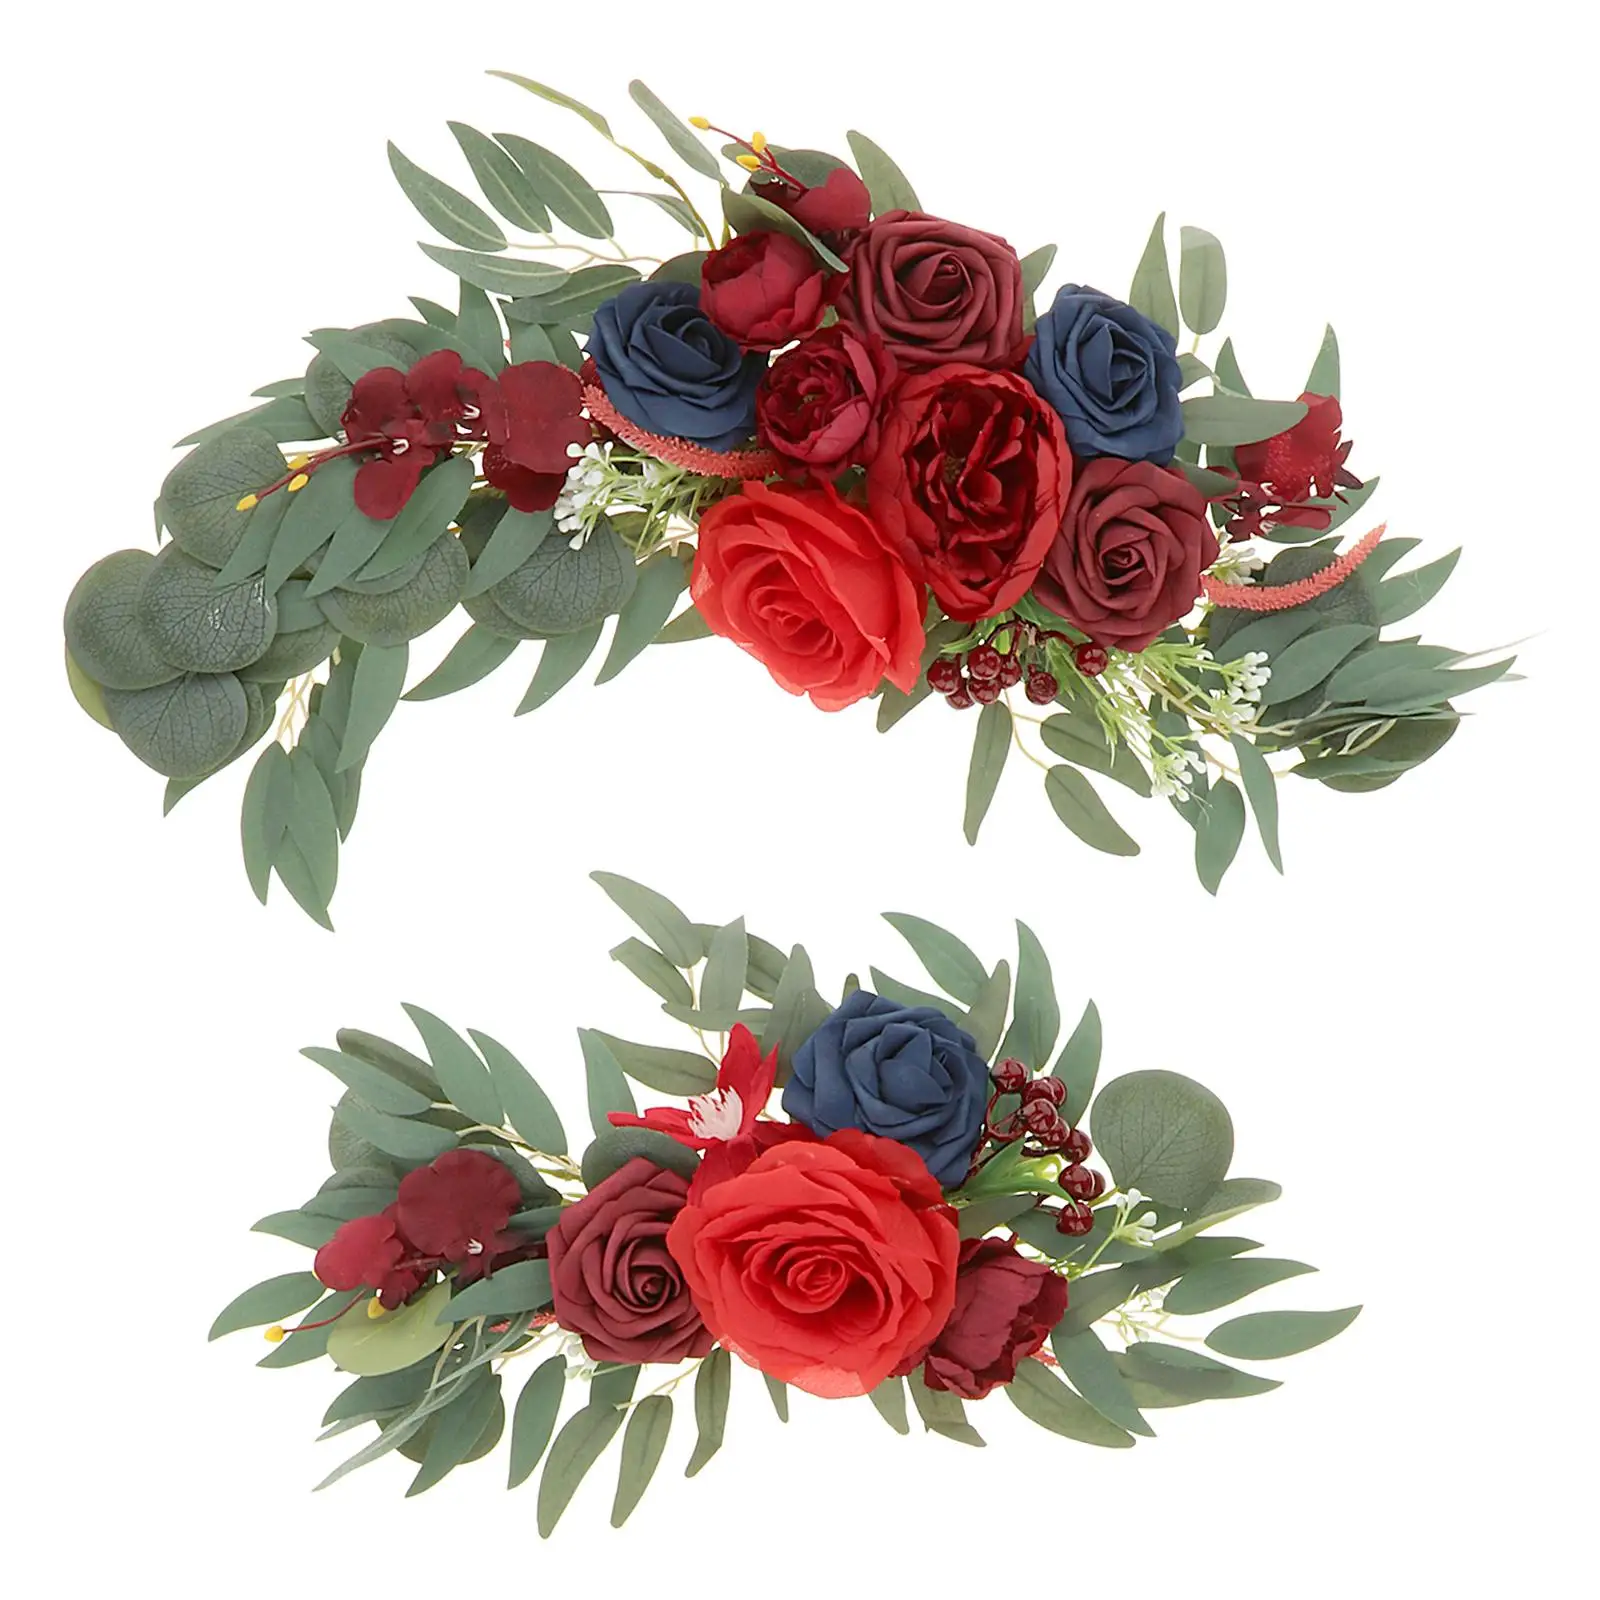 2 Pieces Artificial Flower Swag Wedding Arch Flowers for Wedding Table Centerpieces